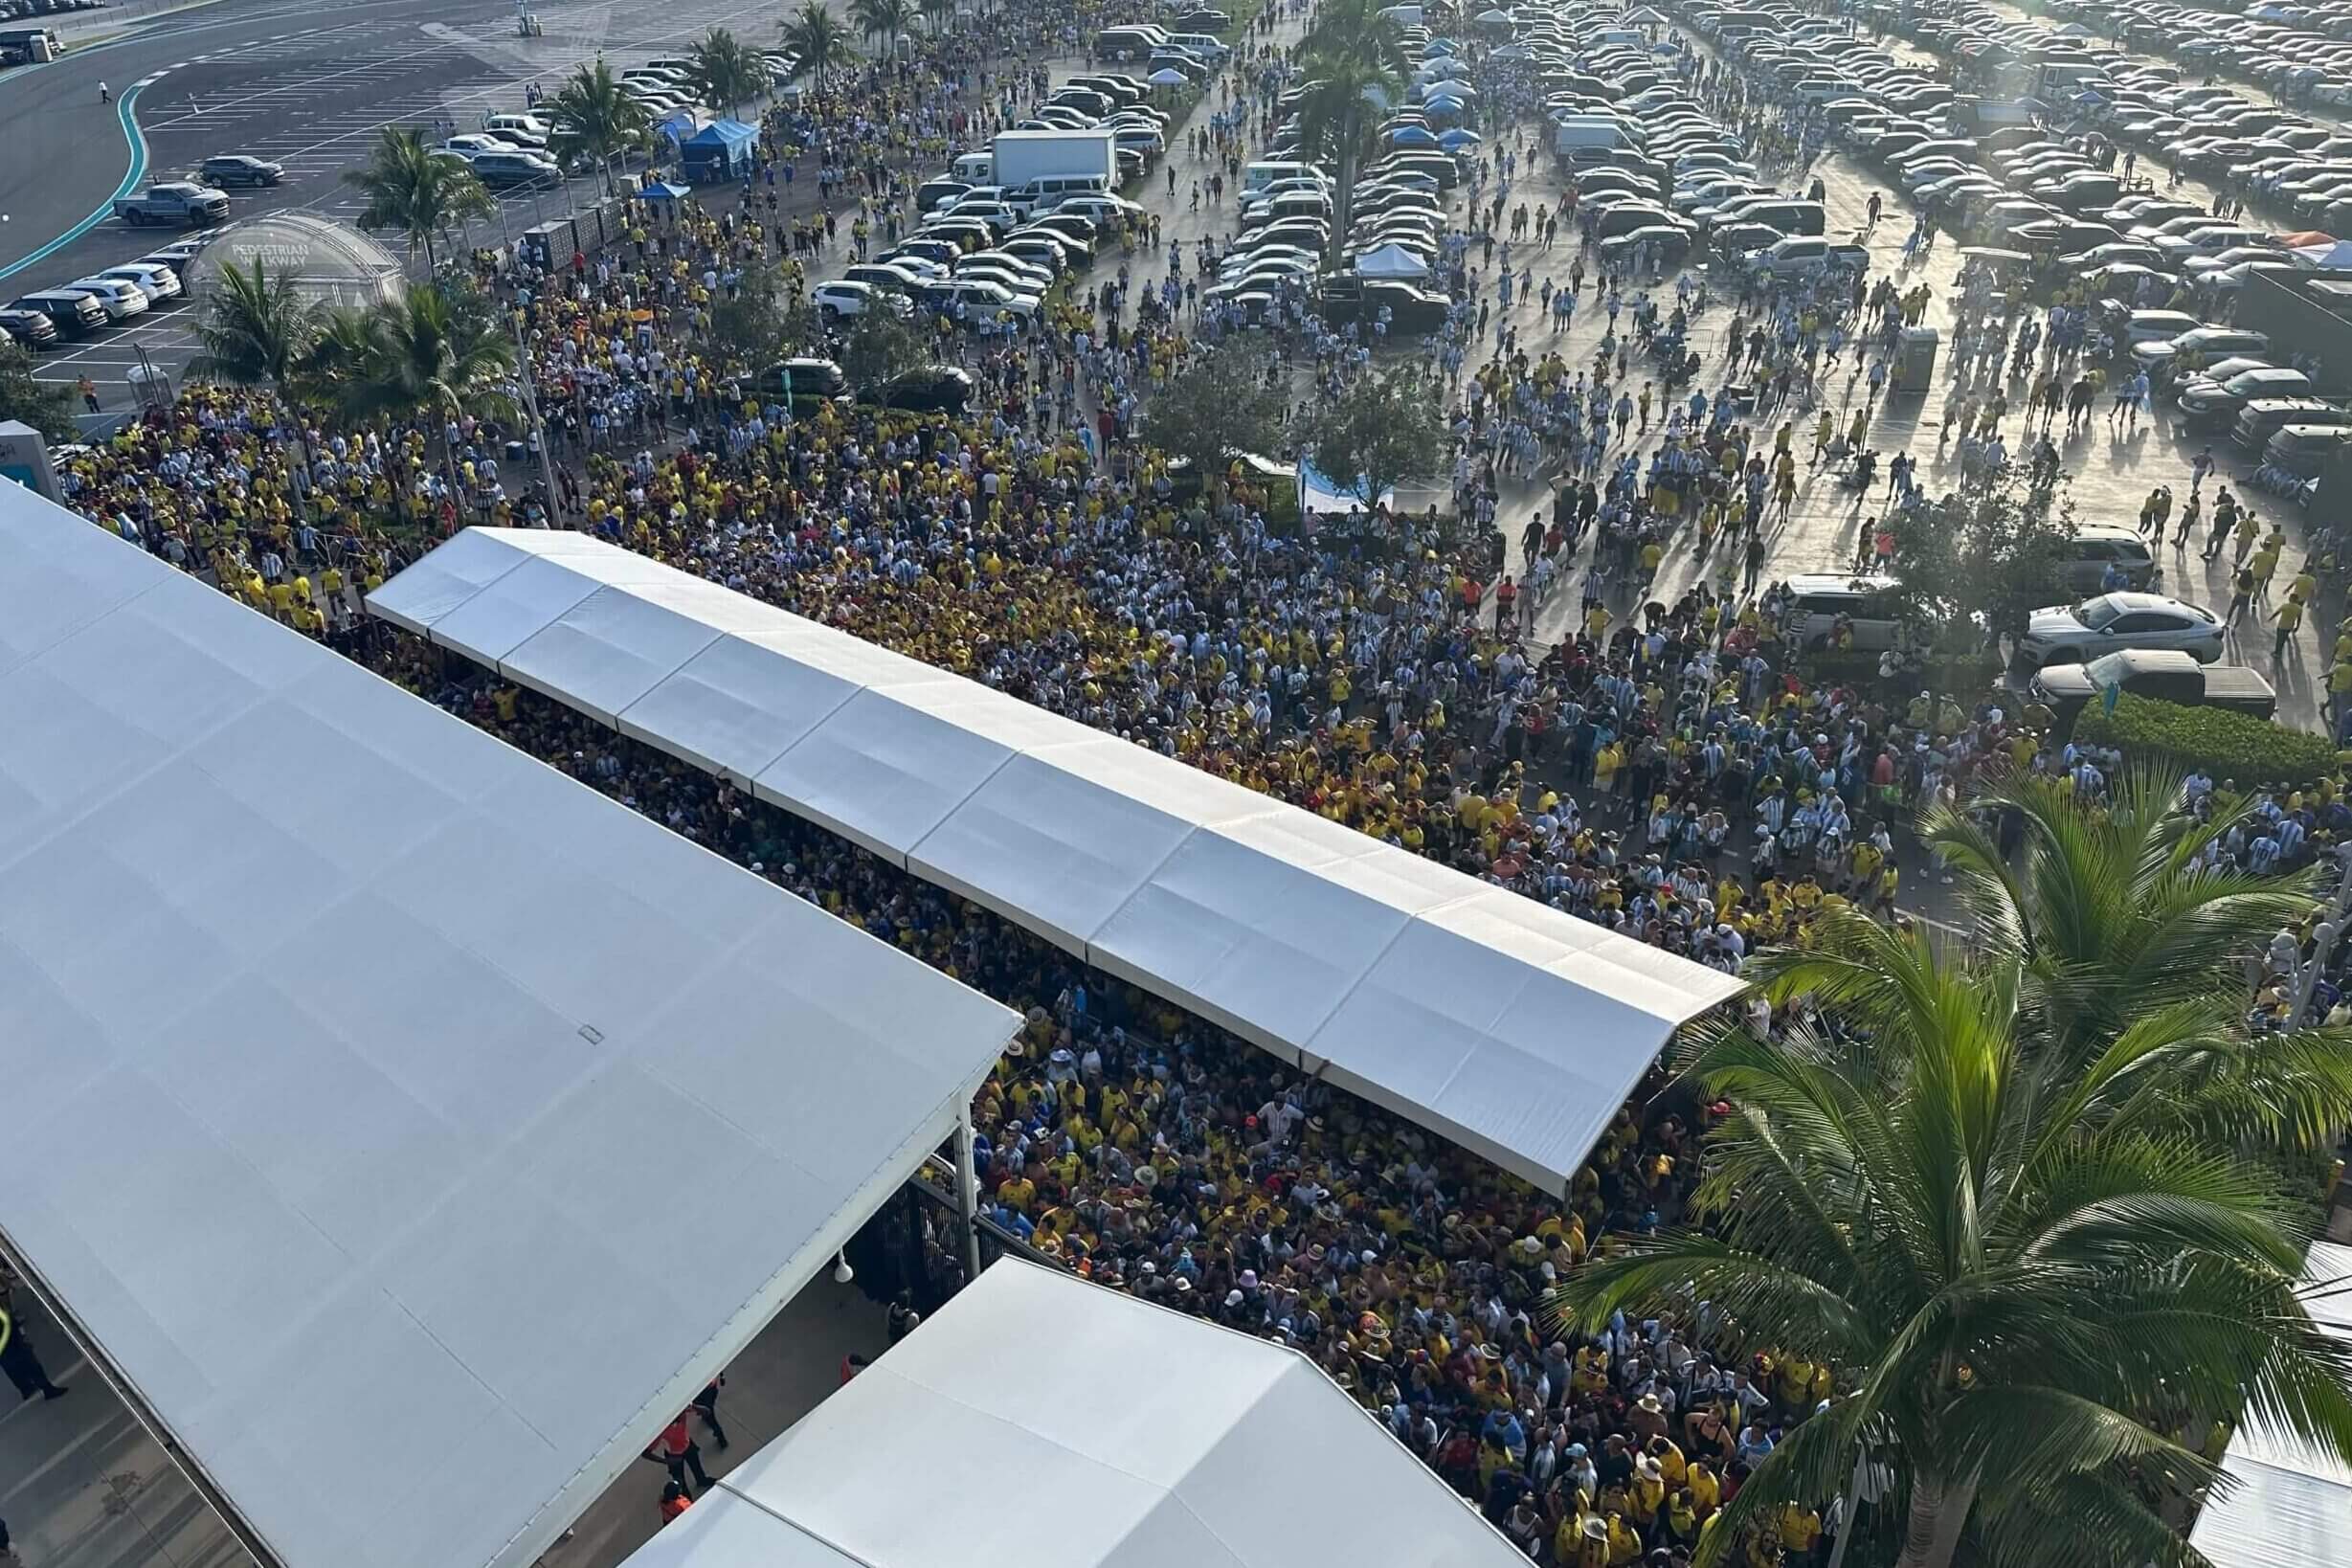 Copa America final kick-off delayed after fans struggle to enter stadium